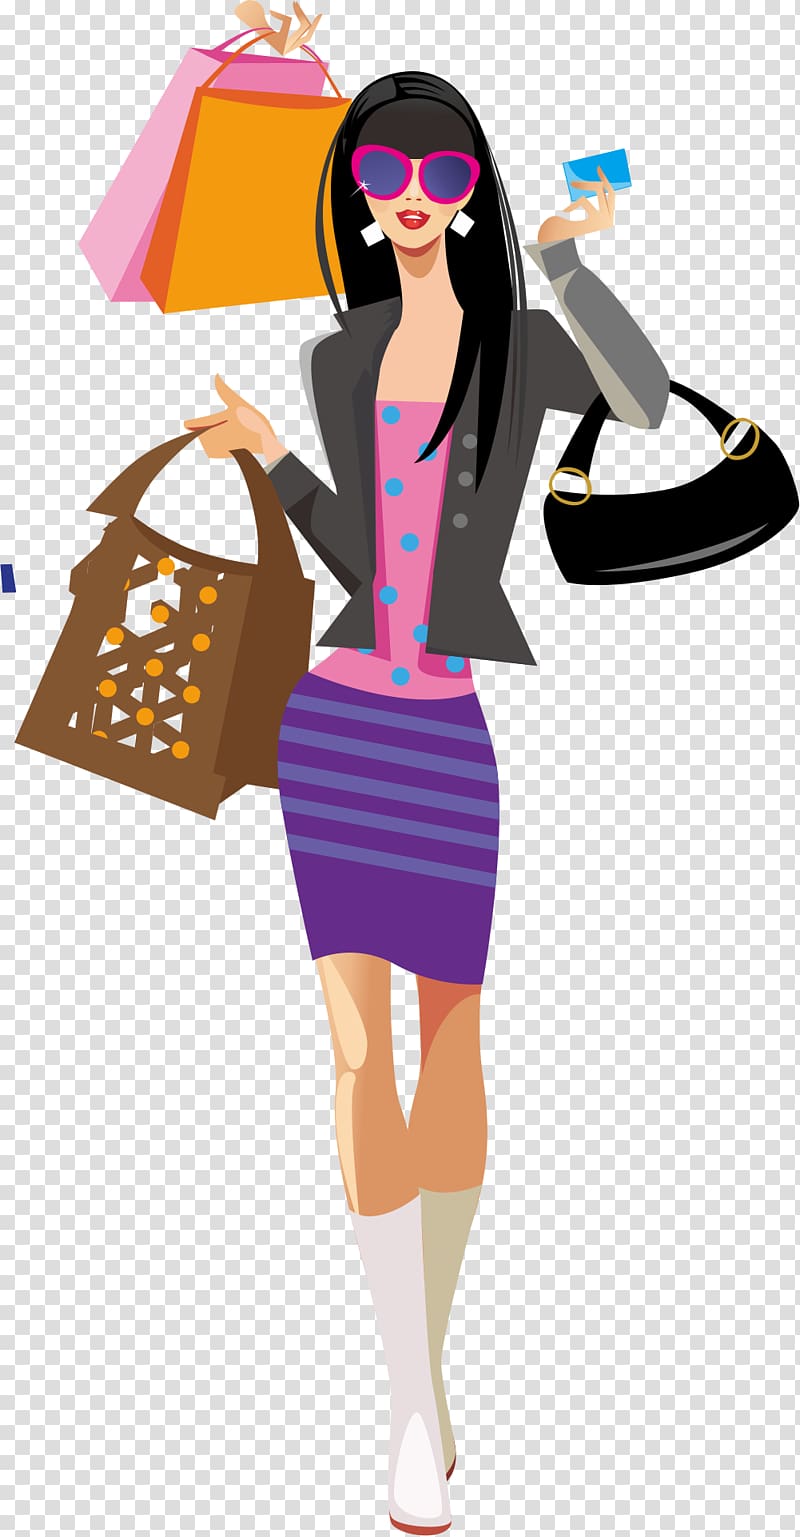 woman carrying bag illustration, Shopping Fashion , Cartoon girl transparent background PNG clipart